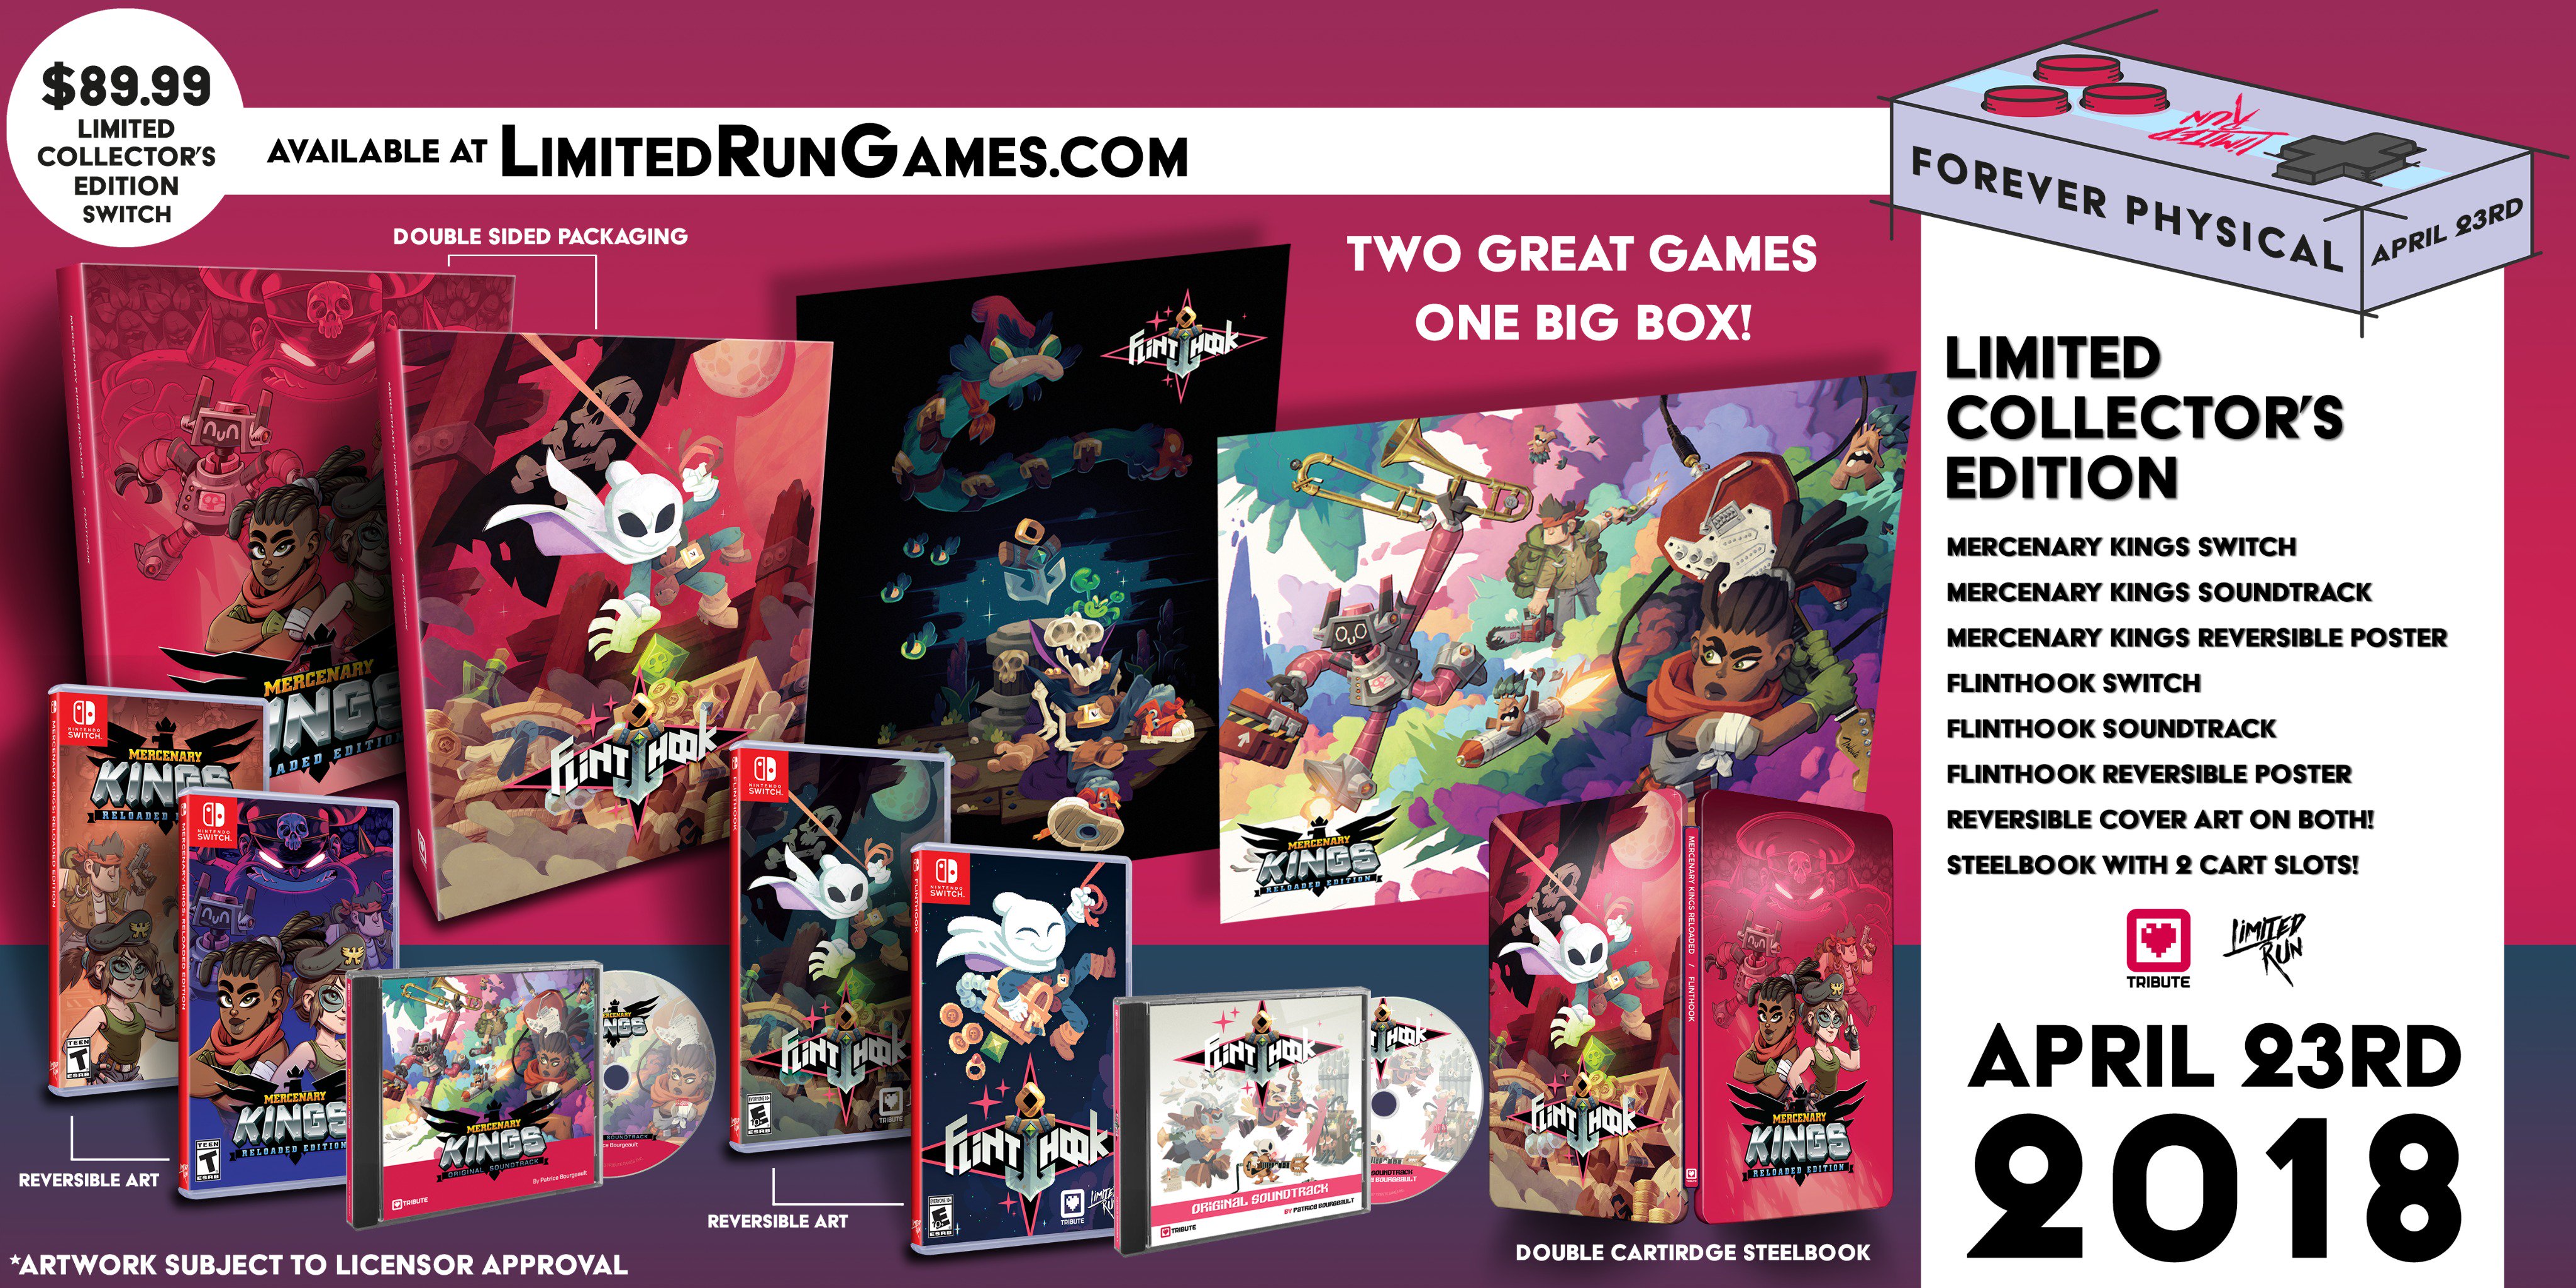 Limited Run on Twitter: "Our next two Nintendo Switch releases and Flinthook from @TributeGames! To celebrate the one year anniversary of Flinthook, preorders for both games will open